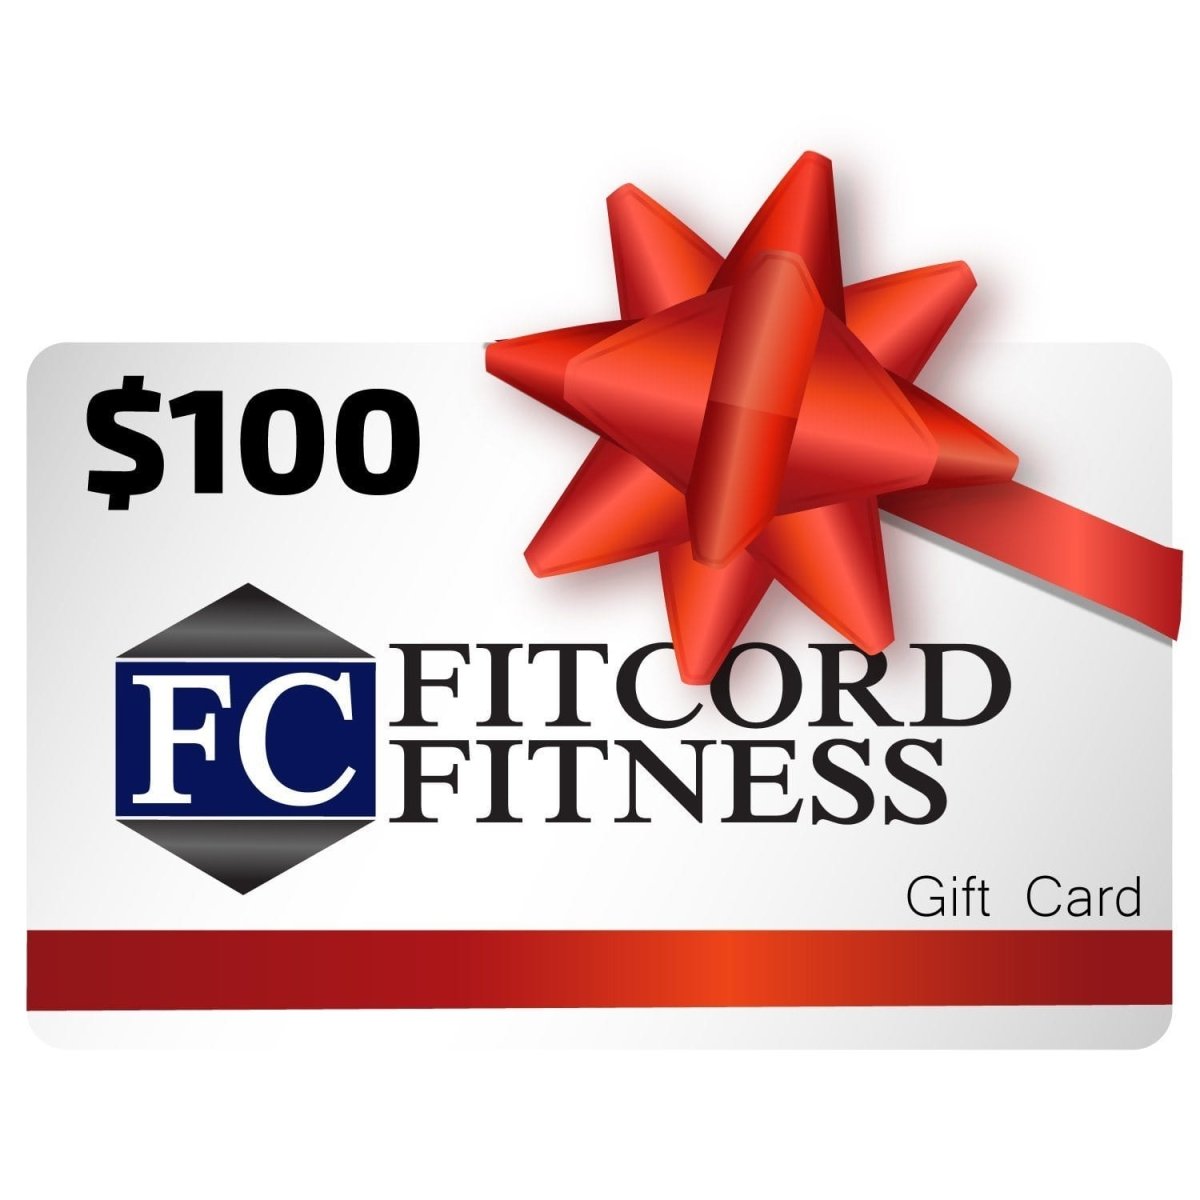 FitCord Gift Card best resistance bands made in USA and covered for safety - FitCord Resistance Bands